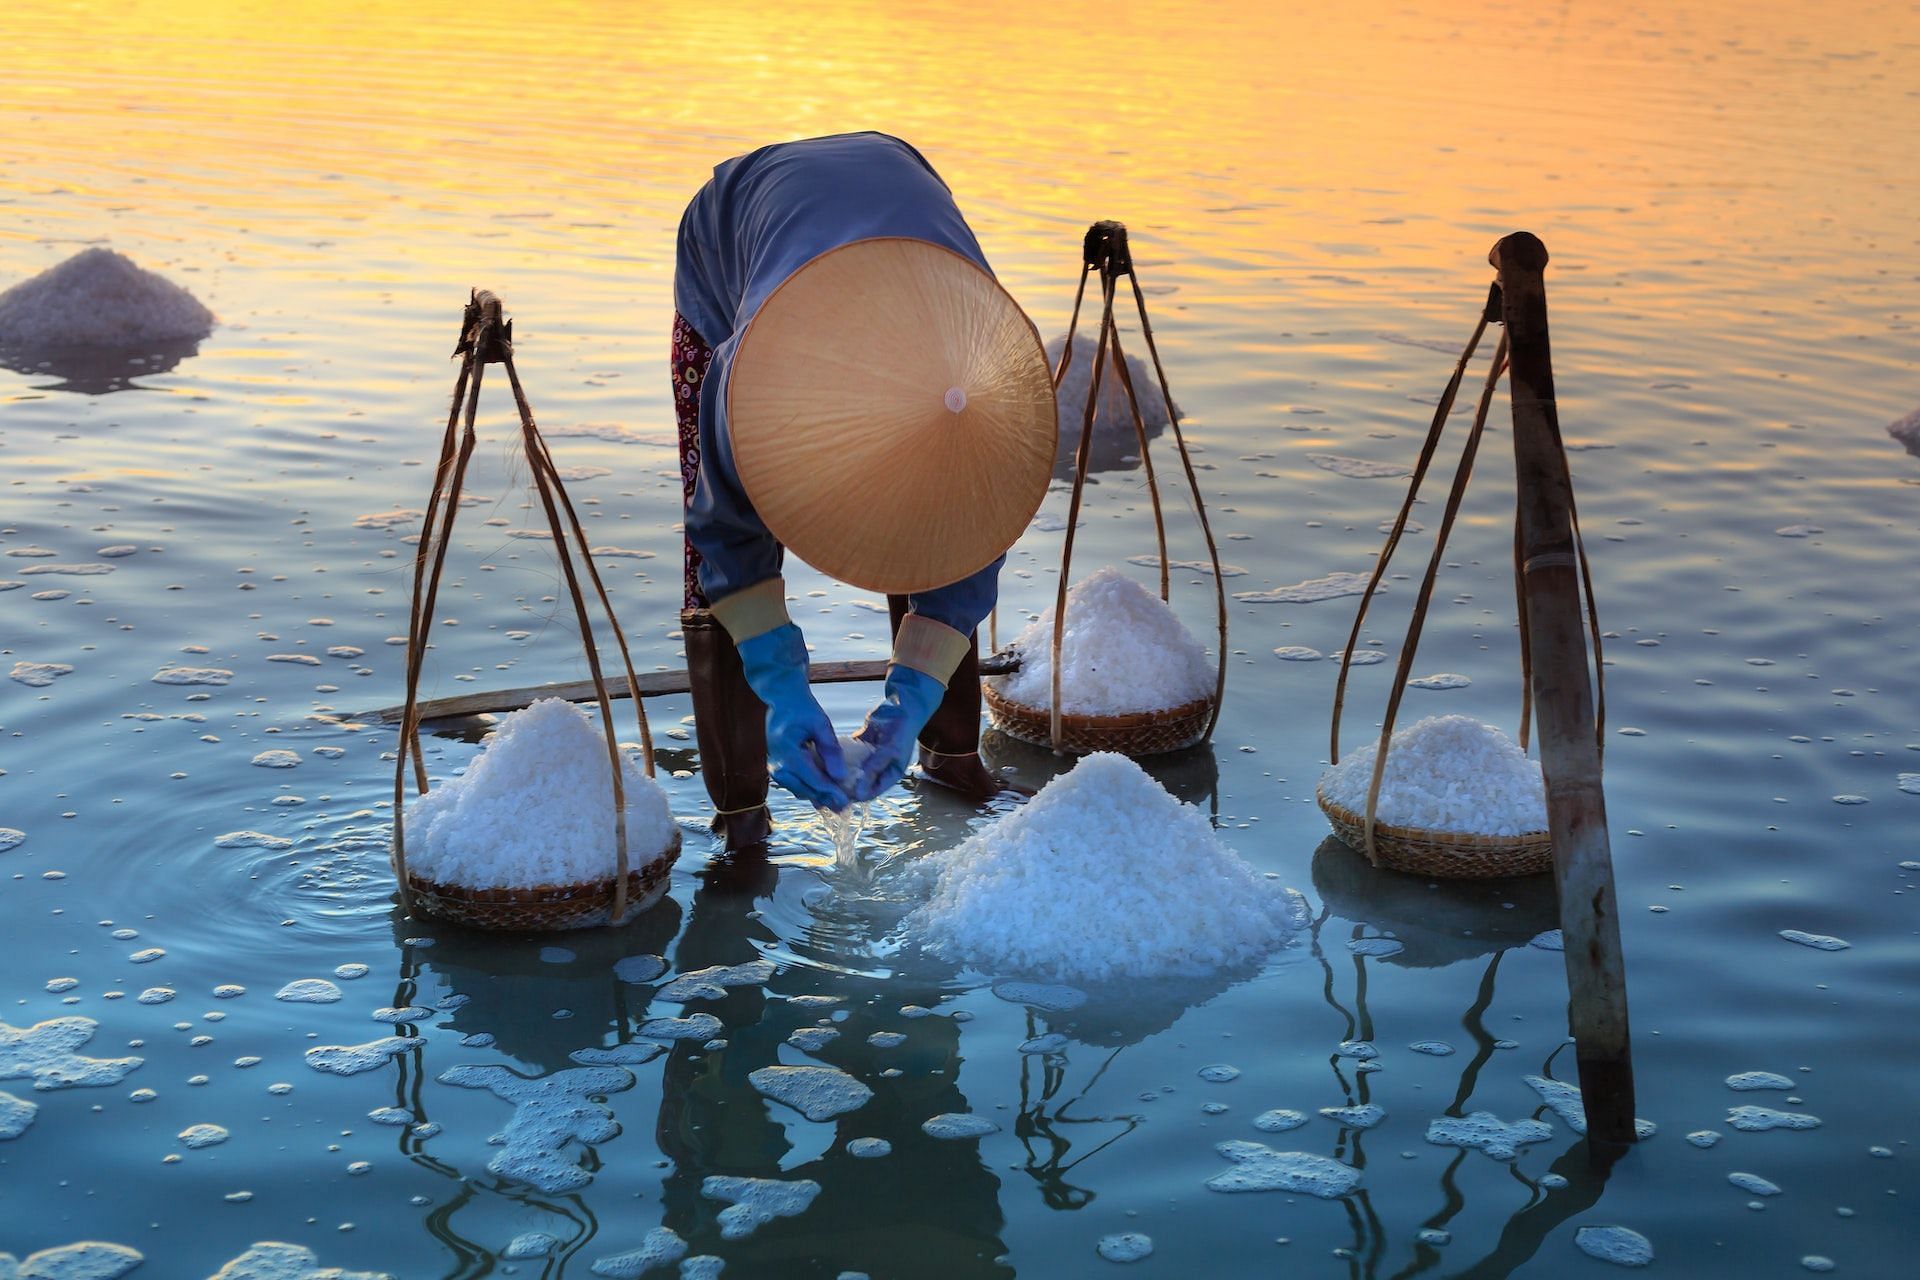 Celtic sea salt is made by evaporating water from saltwater lakes or oceans. (Photo via Pexels/Quang Nguyen Vinh)